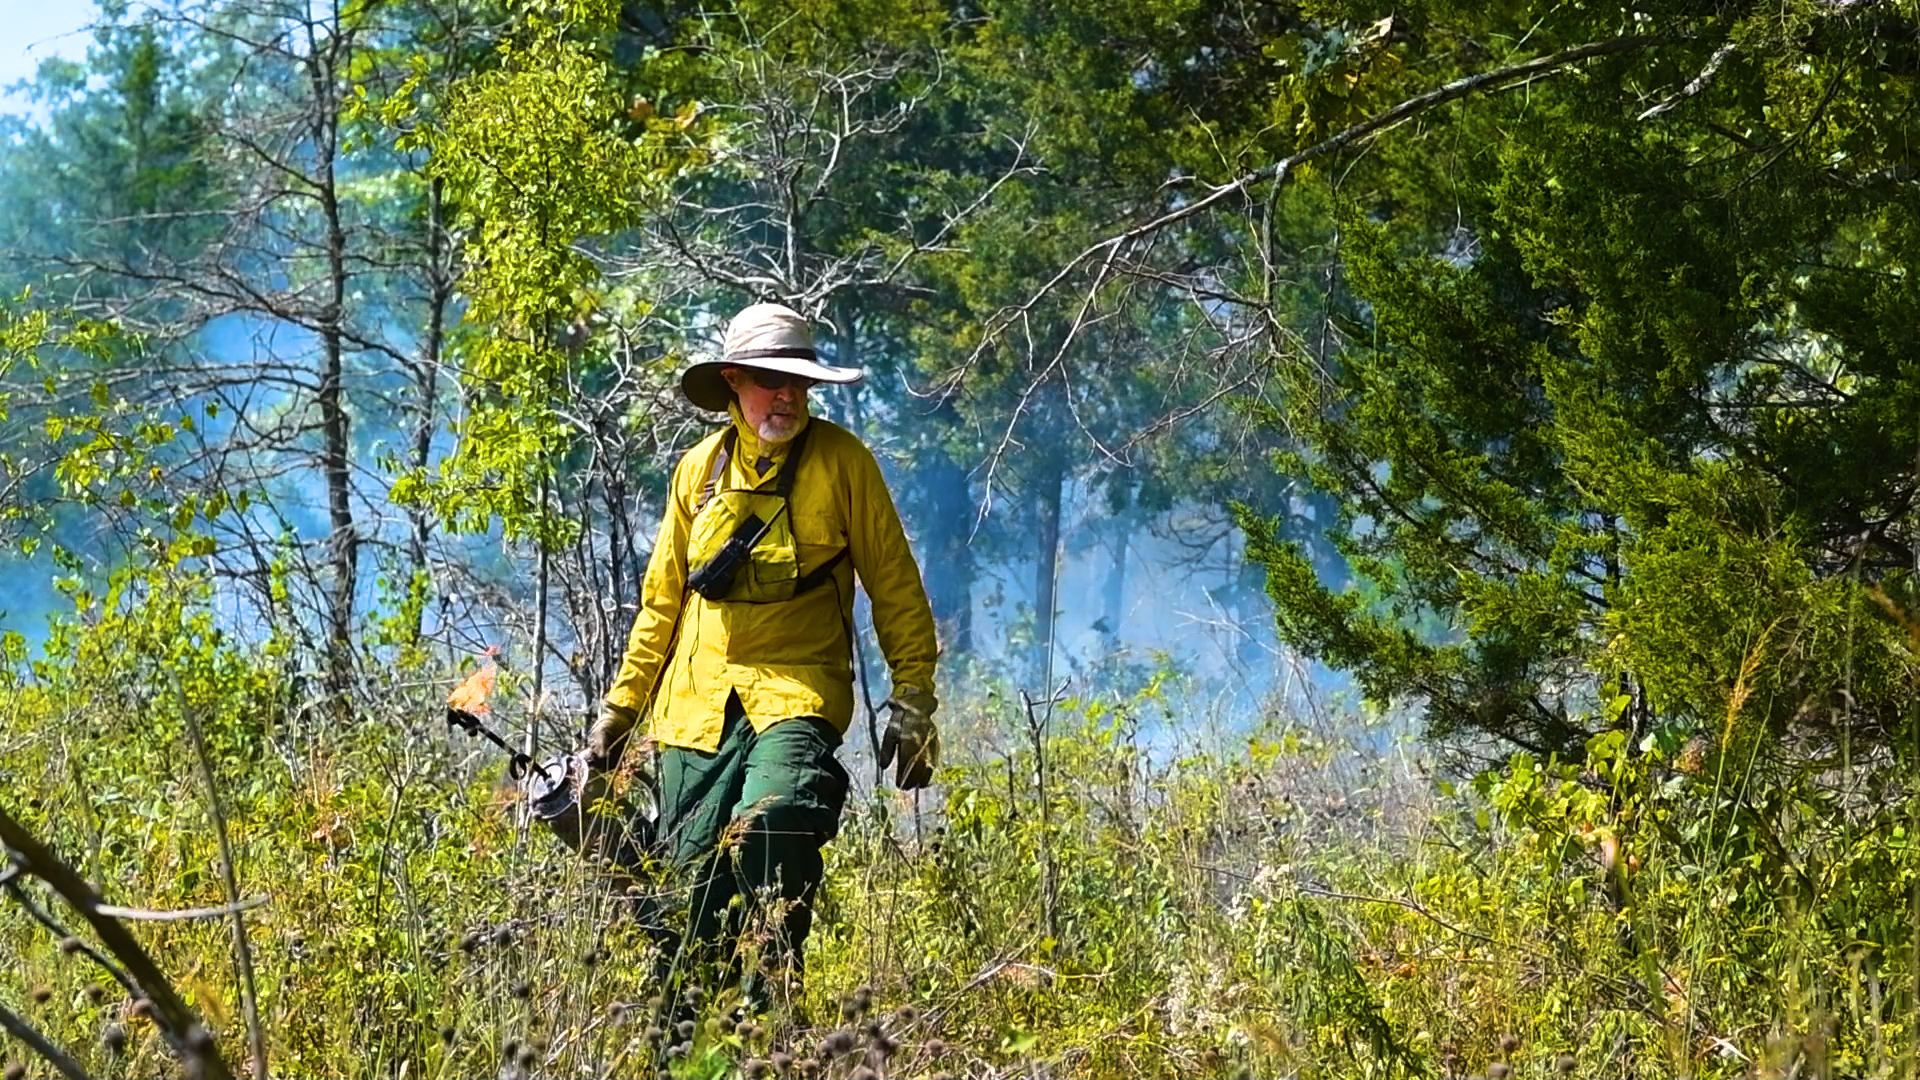 Woods relies on prescribed fire to enrich his acreage with explosive native species ecosystems.